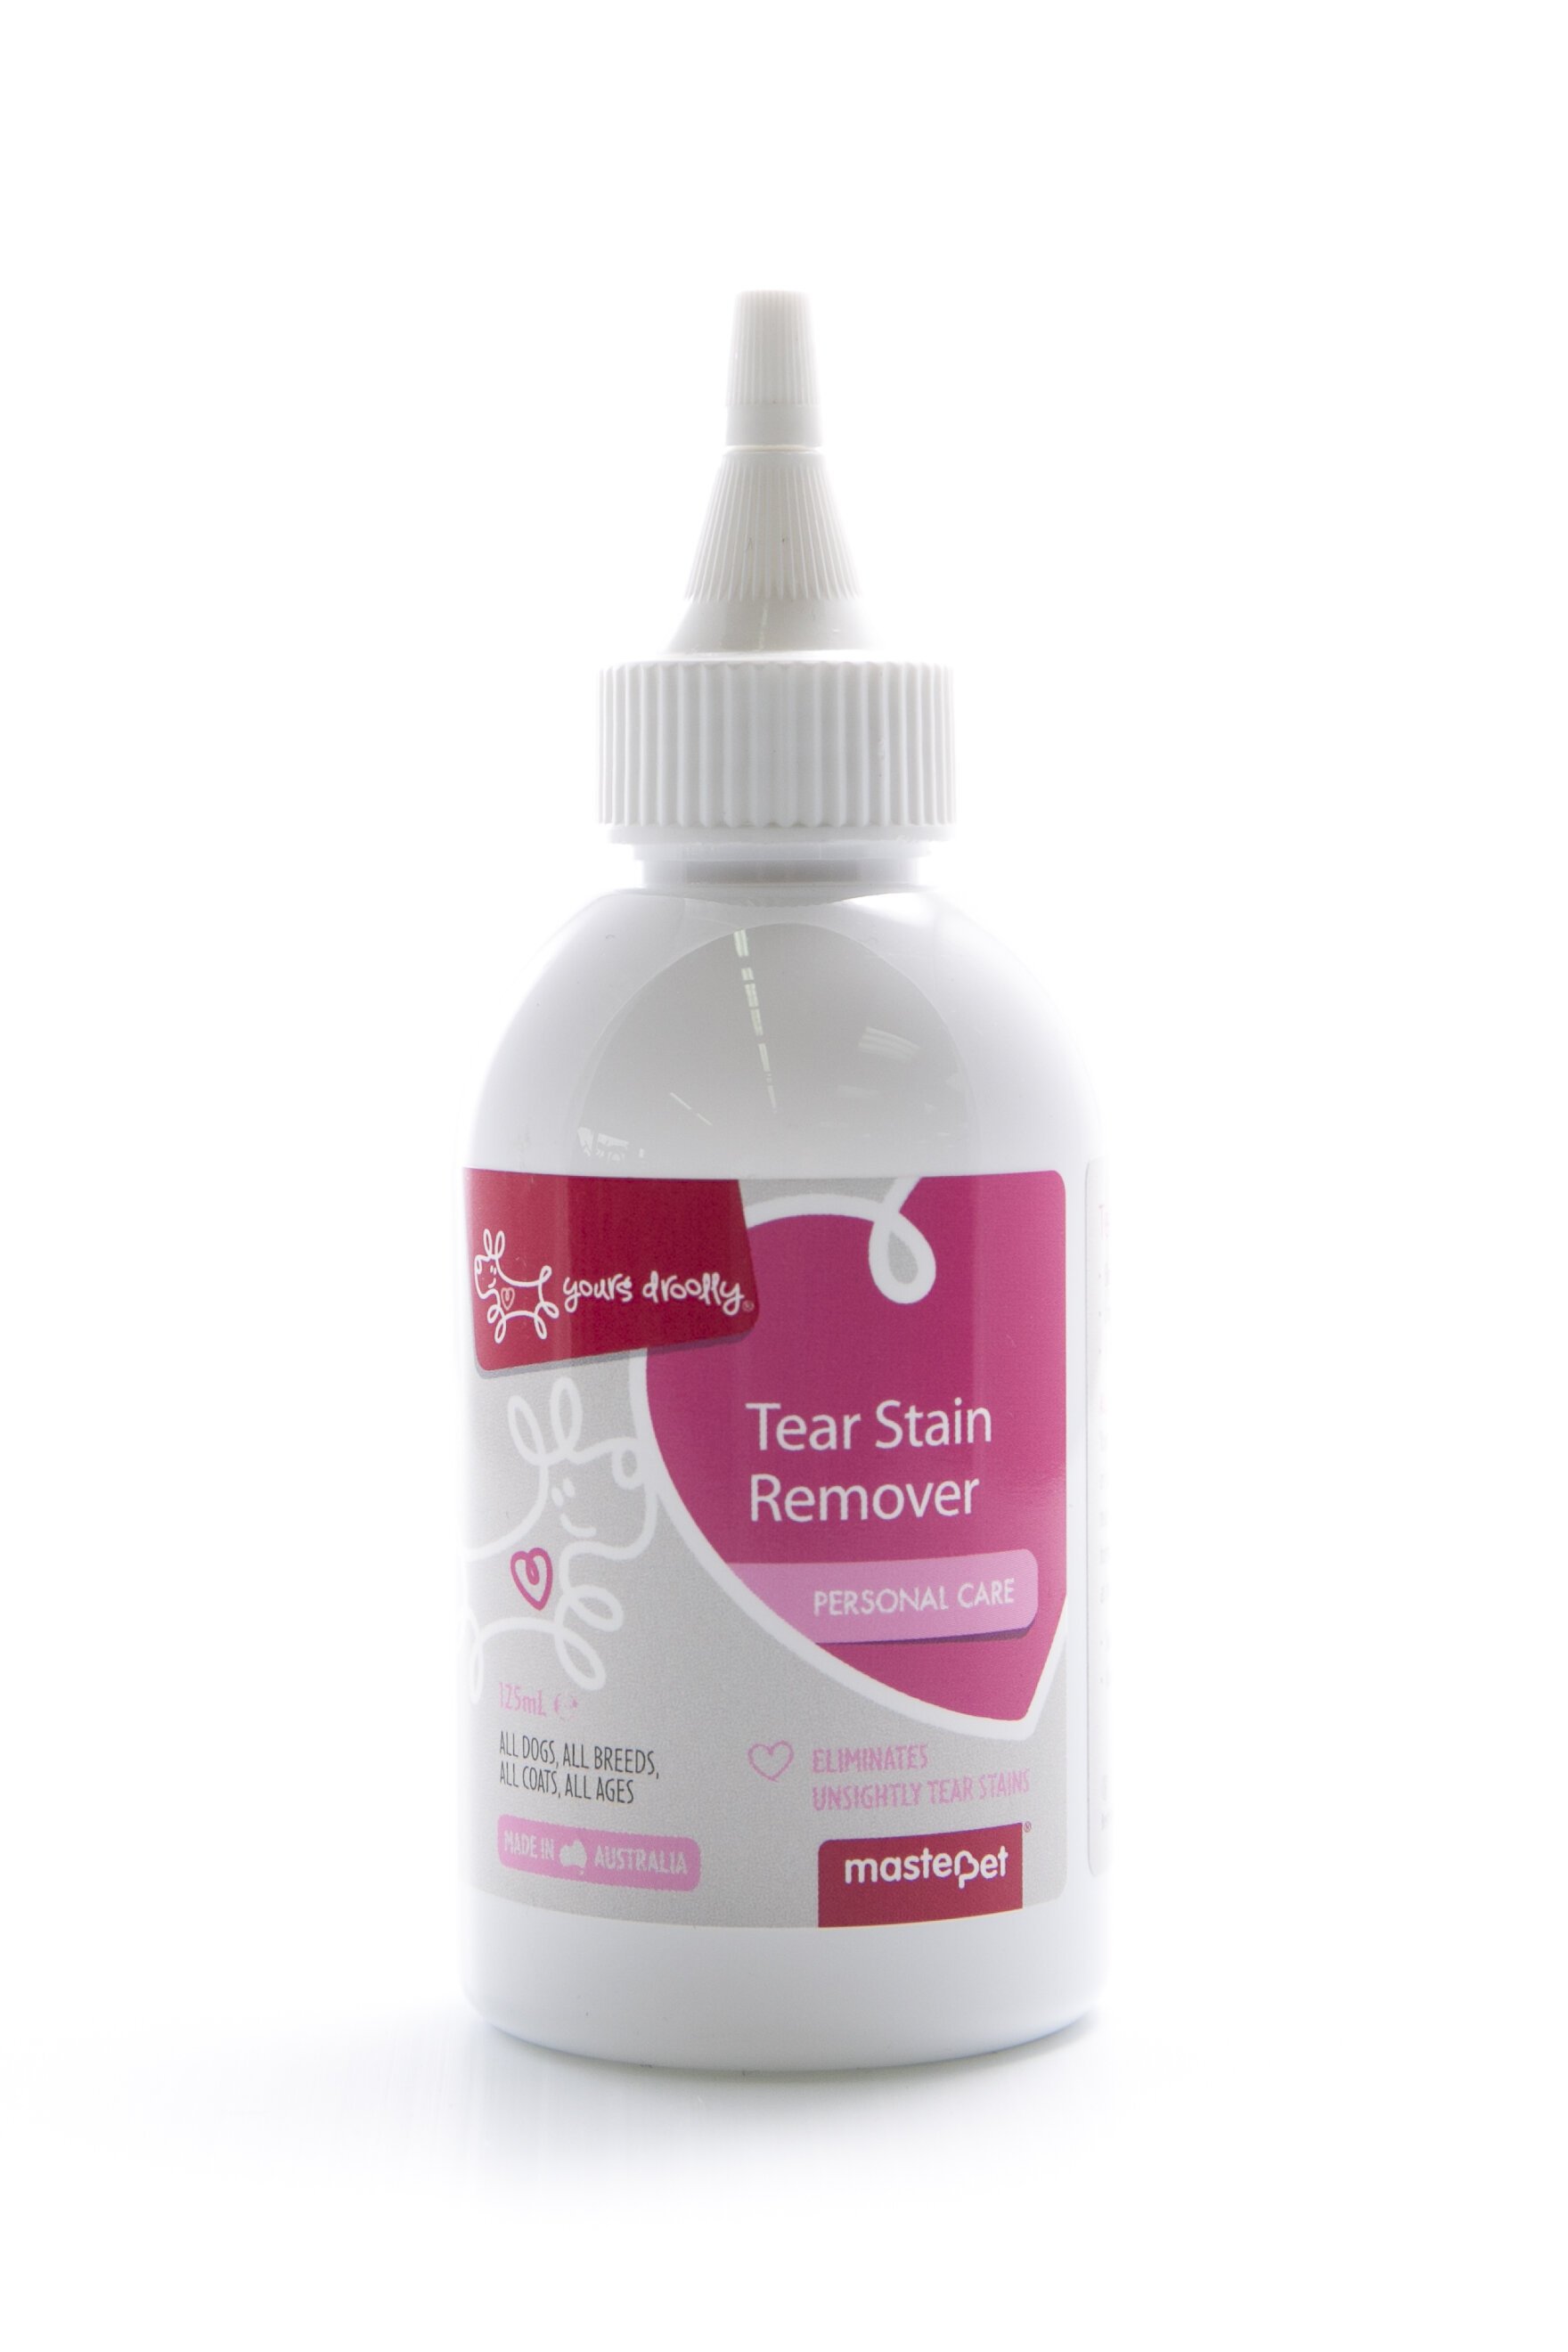 Yours Droolly Tear Stain Remover - Dog 